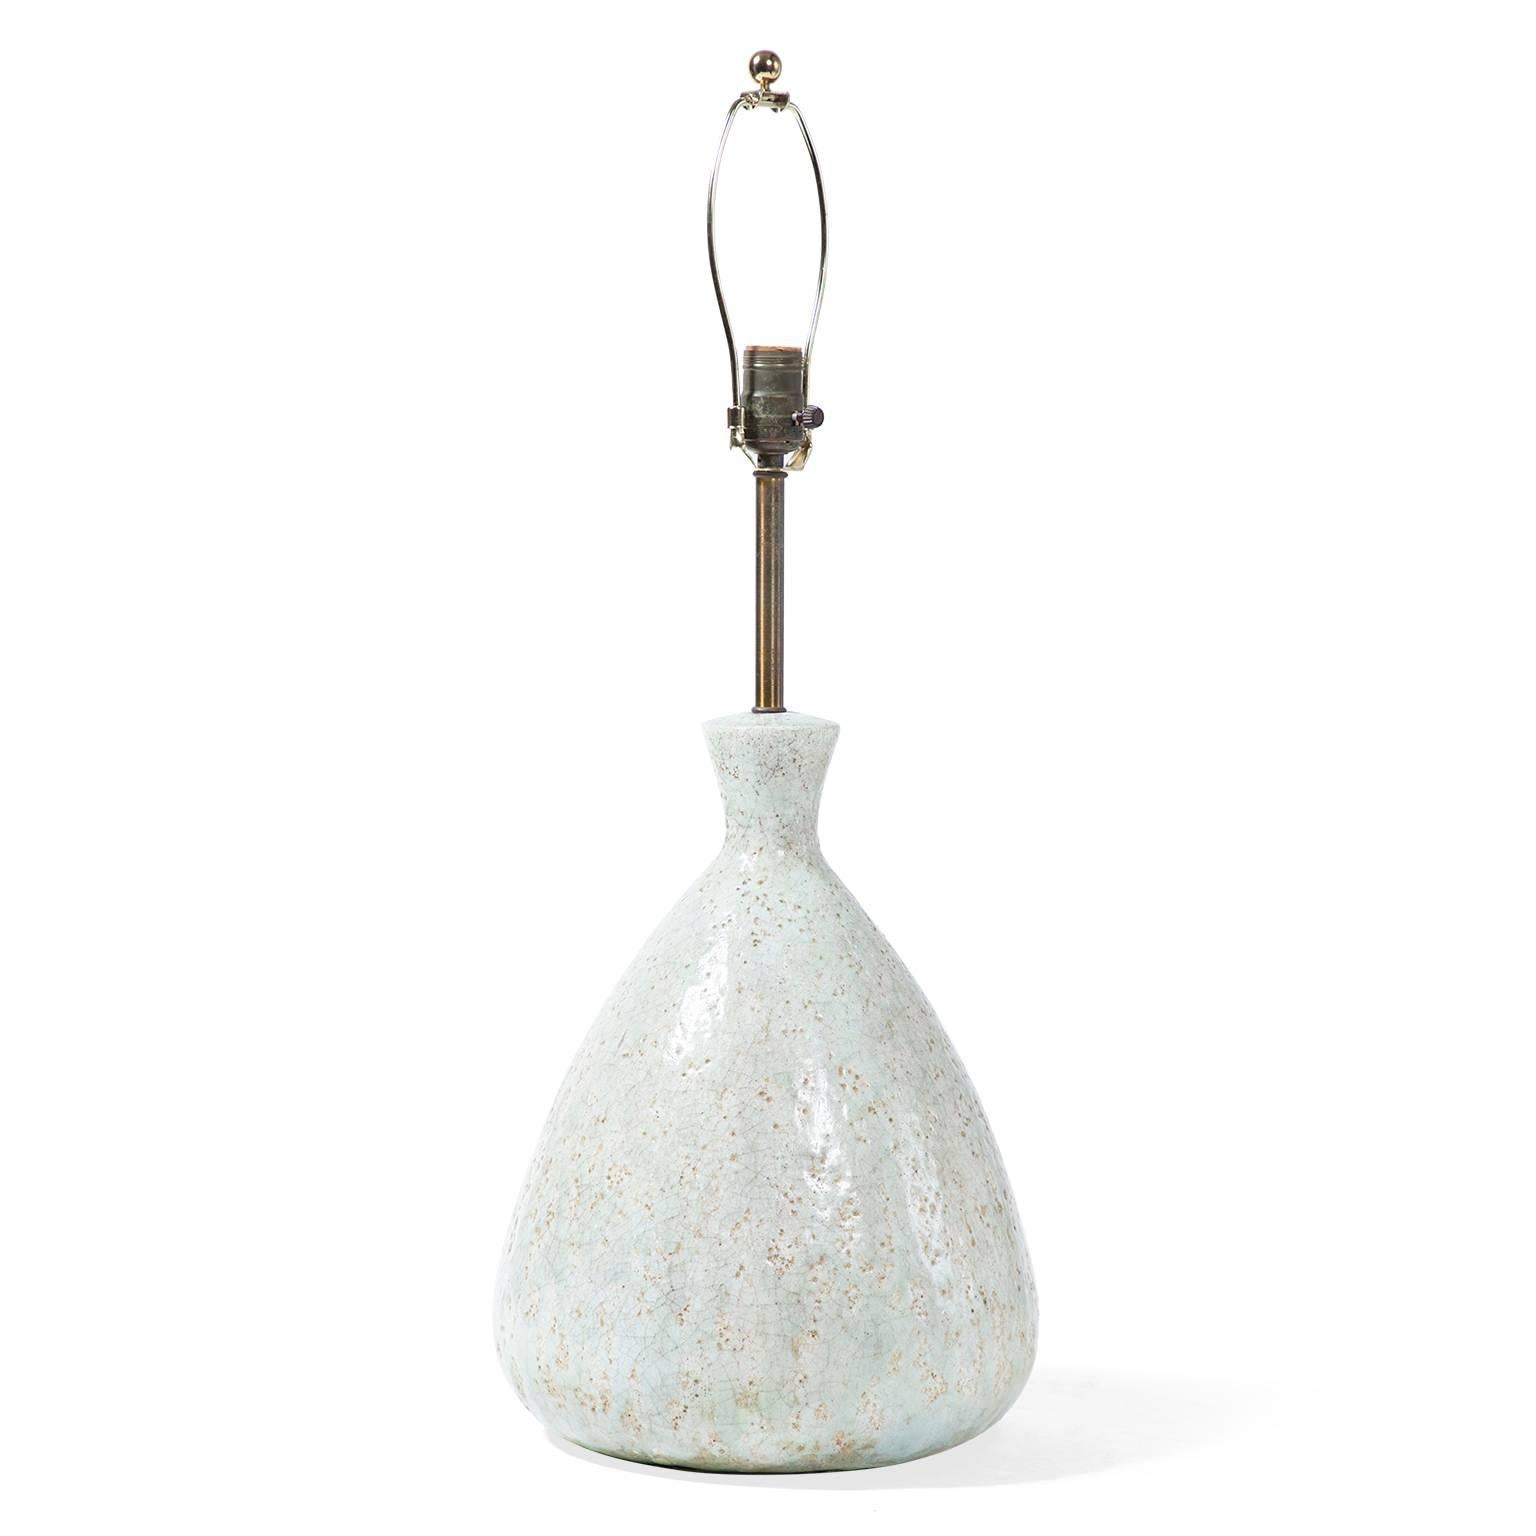 In a classic teardrop shape, this mid-century lamp combines a ceramic base with a metal armature. A reactive glaze alternates between pale blue and beige and creates a crackled, textural surface. In excellent working condition, the lamp includes a